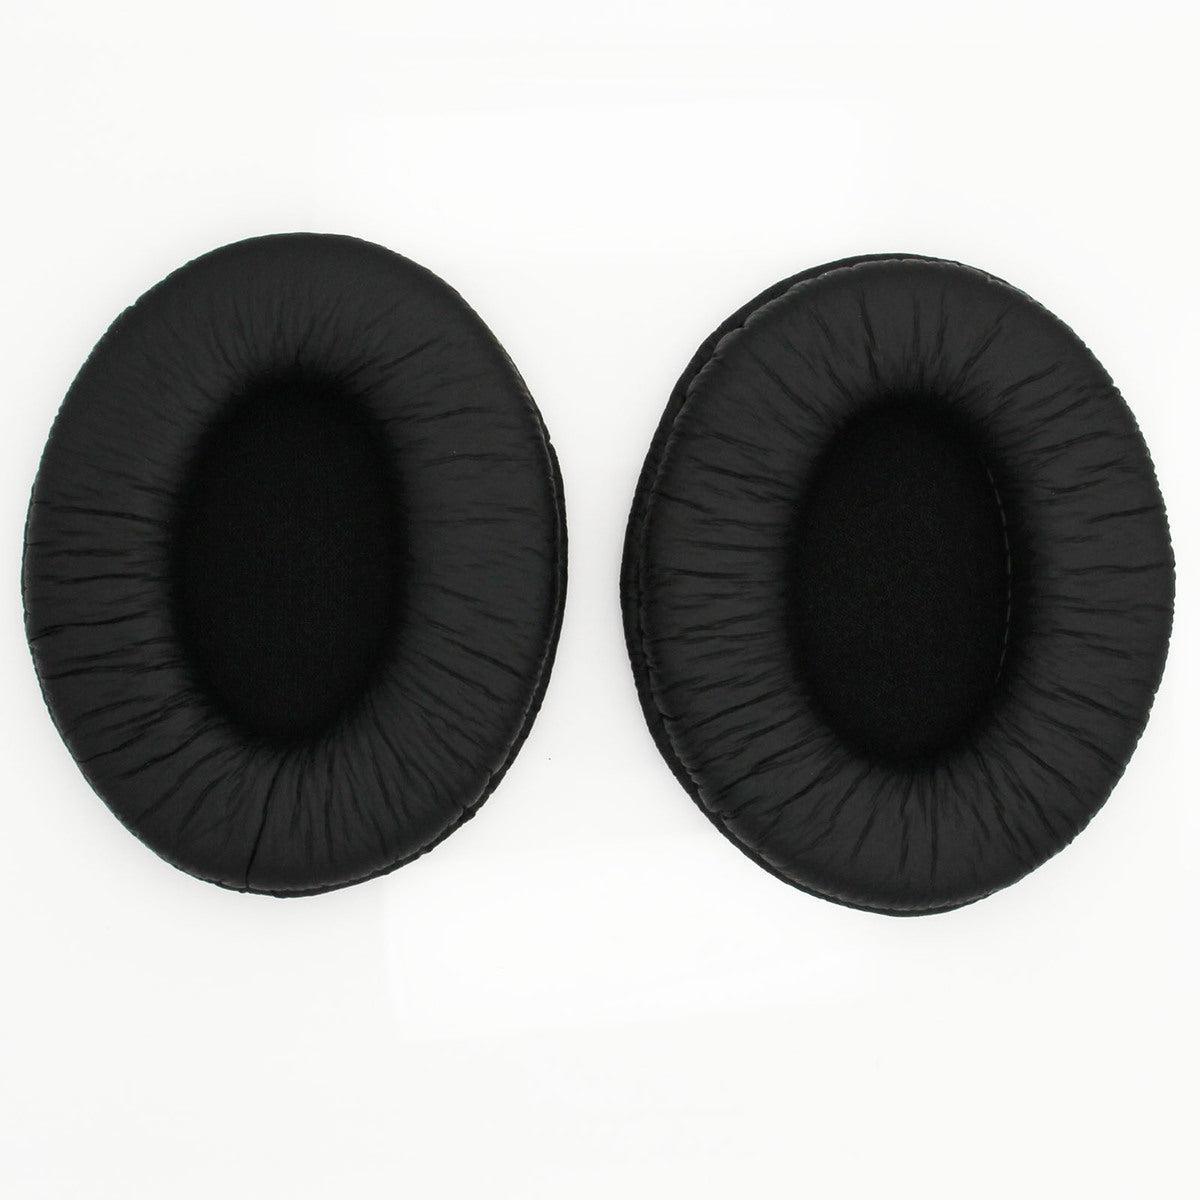 Replacement Ear Pad Cushions Compatible with the Sony MDR-NC60, MDR-D333 & DR-BT50